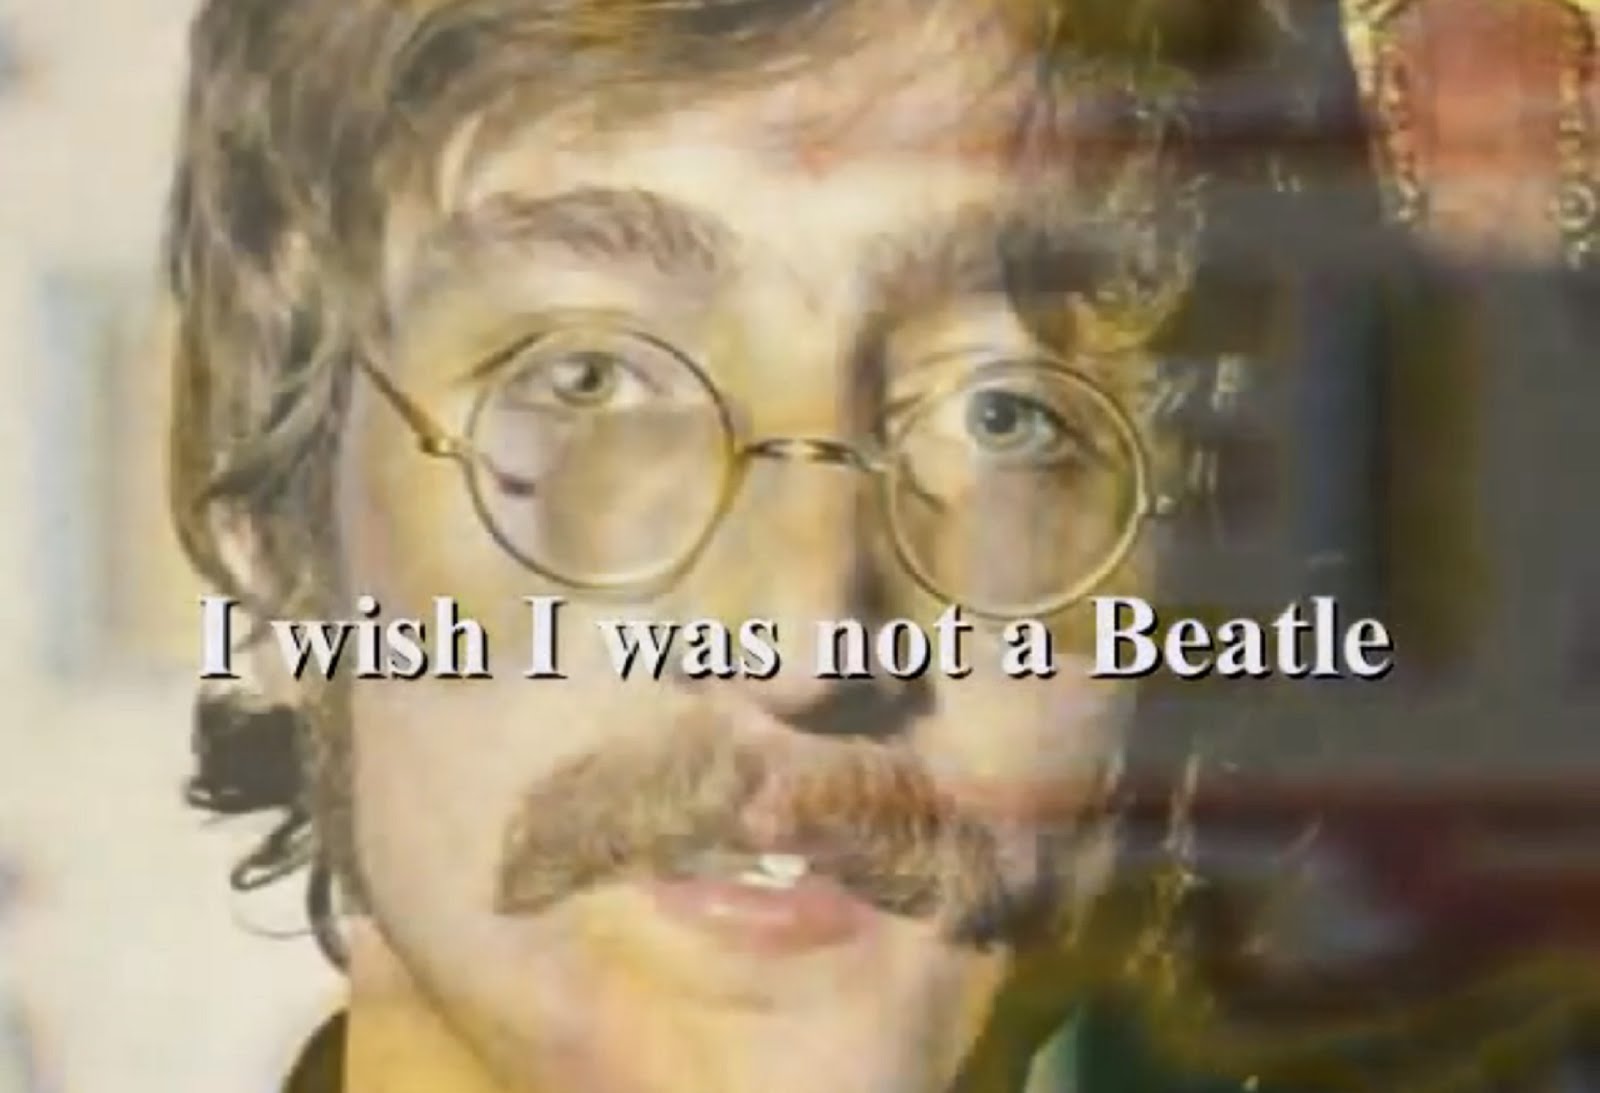 I WISHED I WAS NOT A BEATLE